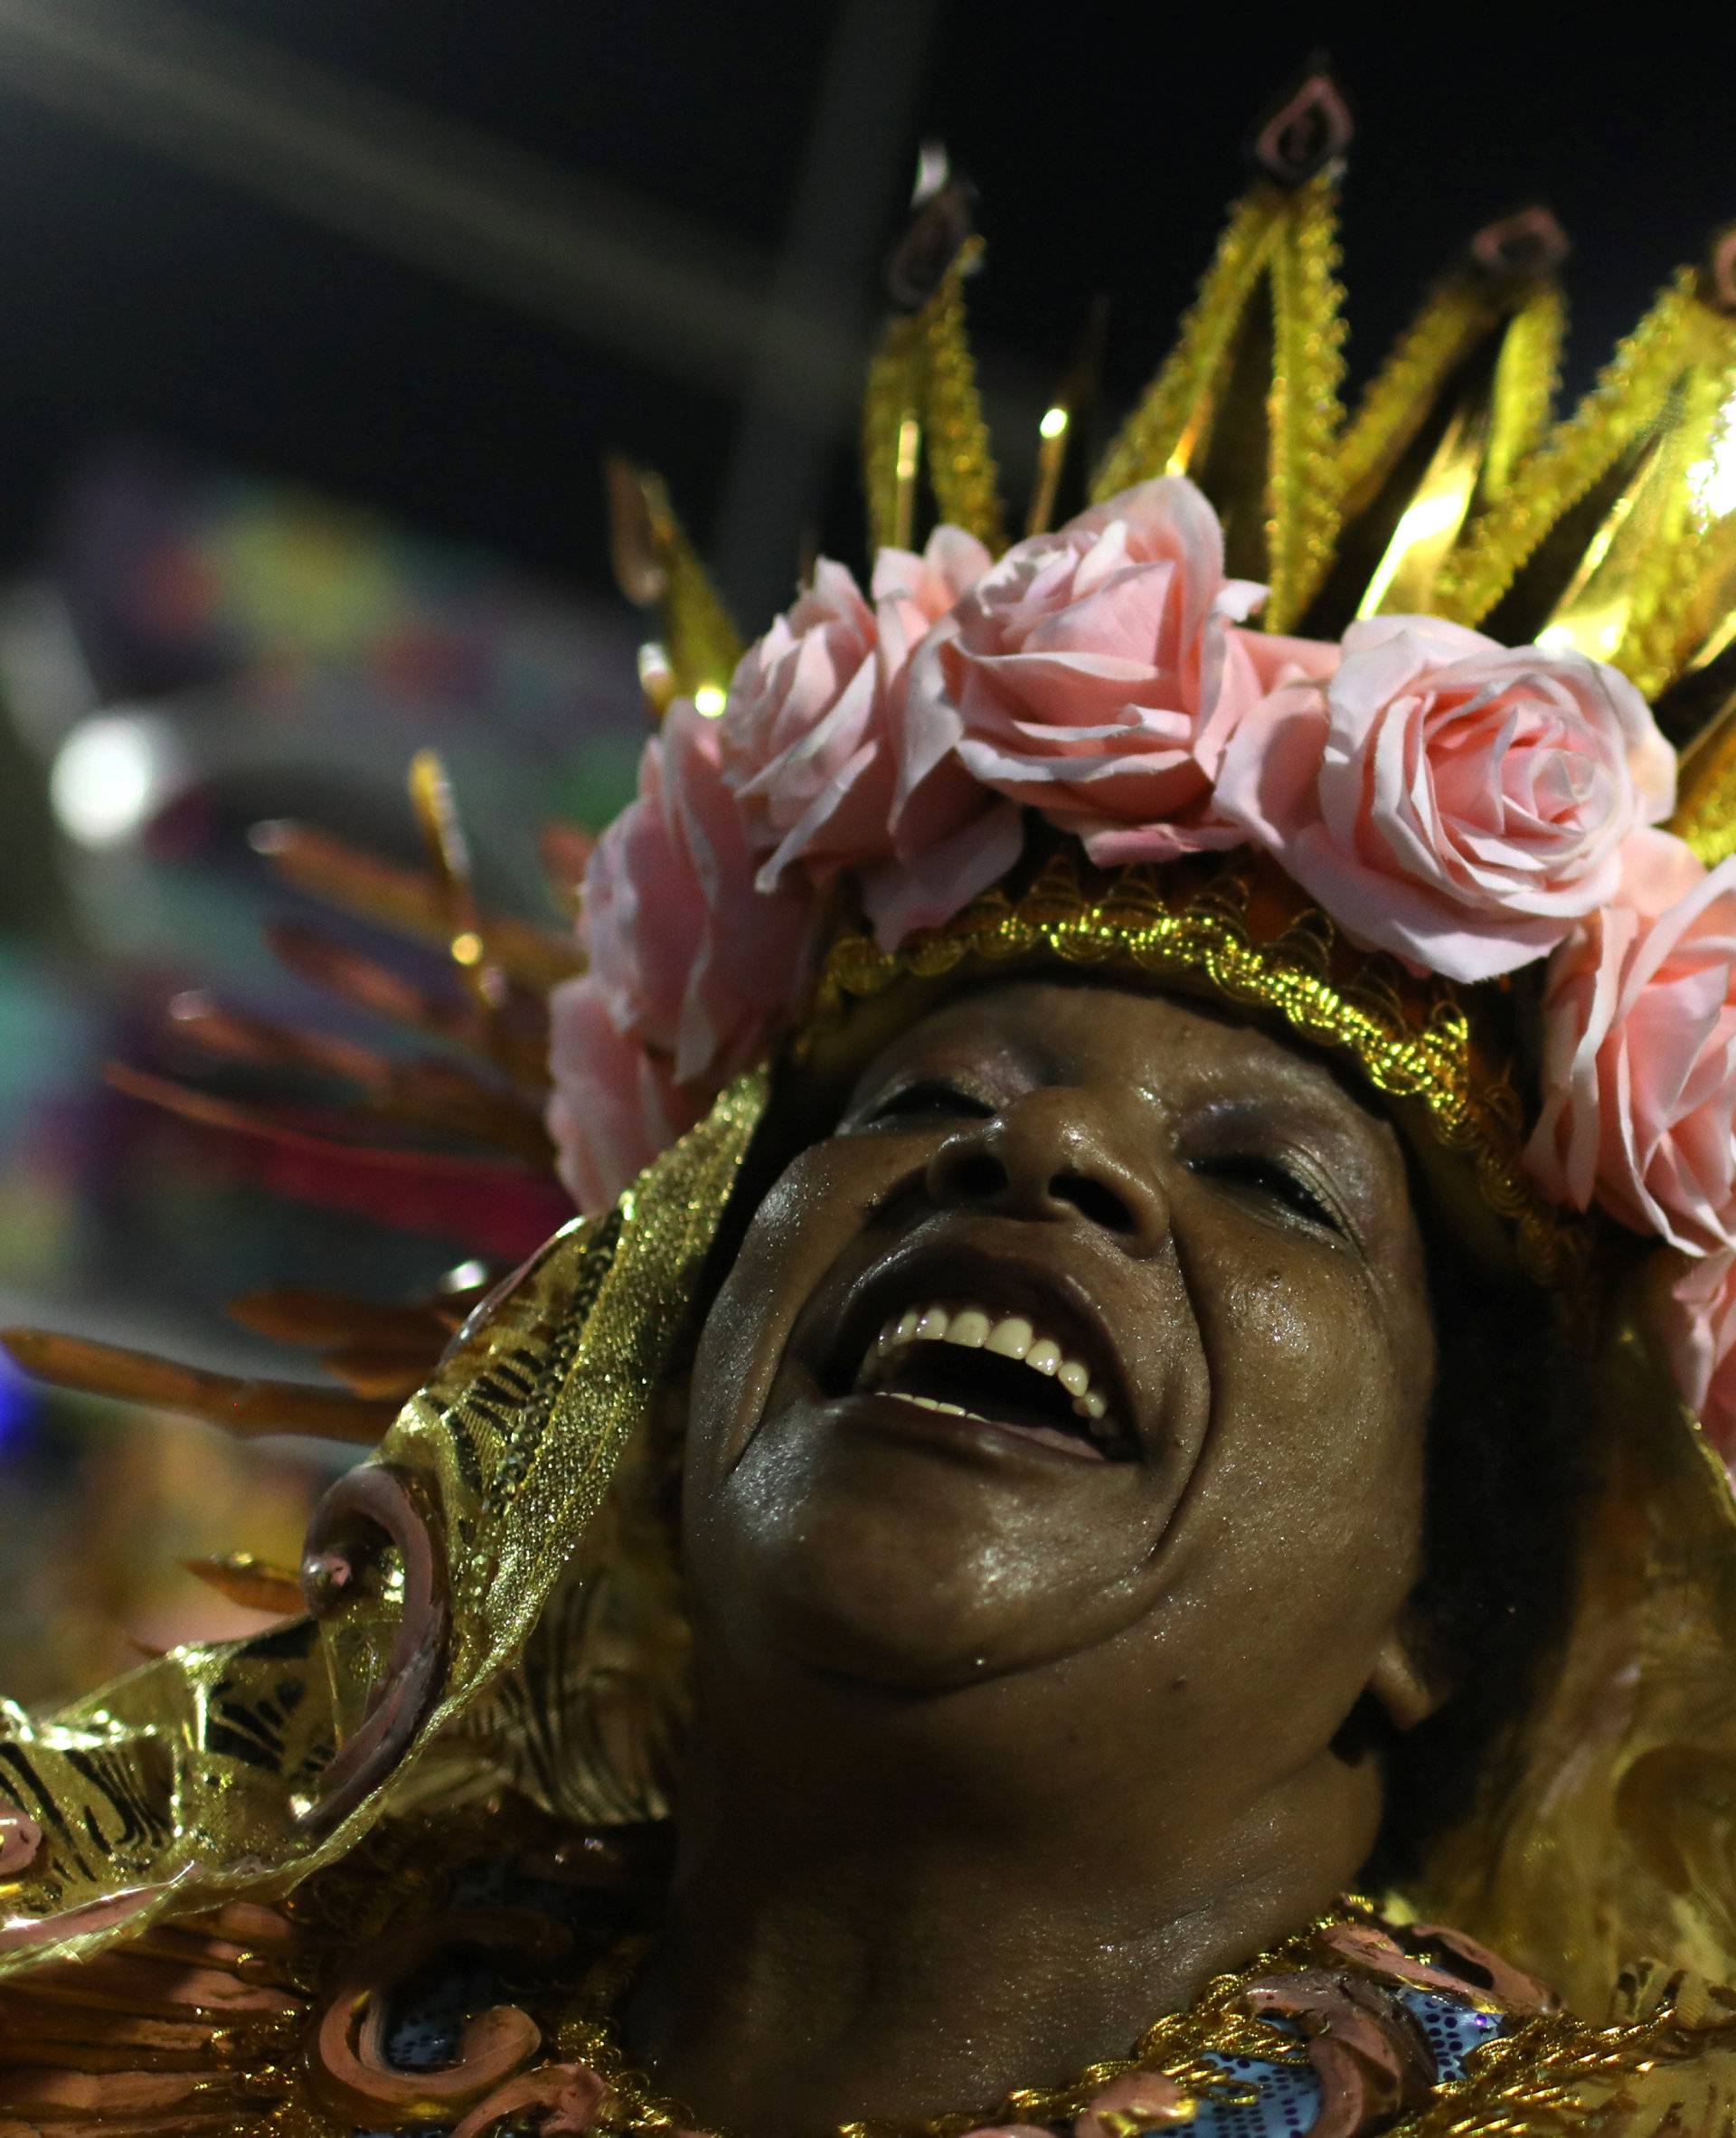 A reveller from Beija-Flor samba school performs during the second night of the Carnival parade at the Sambadrome in Rio de Janeiro